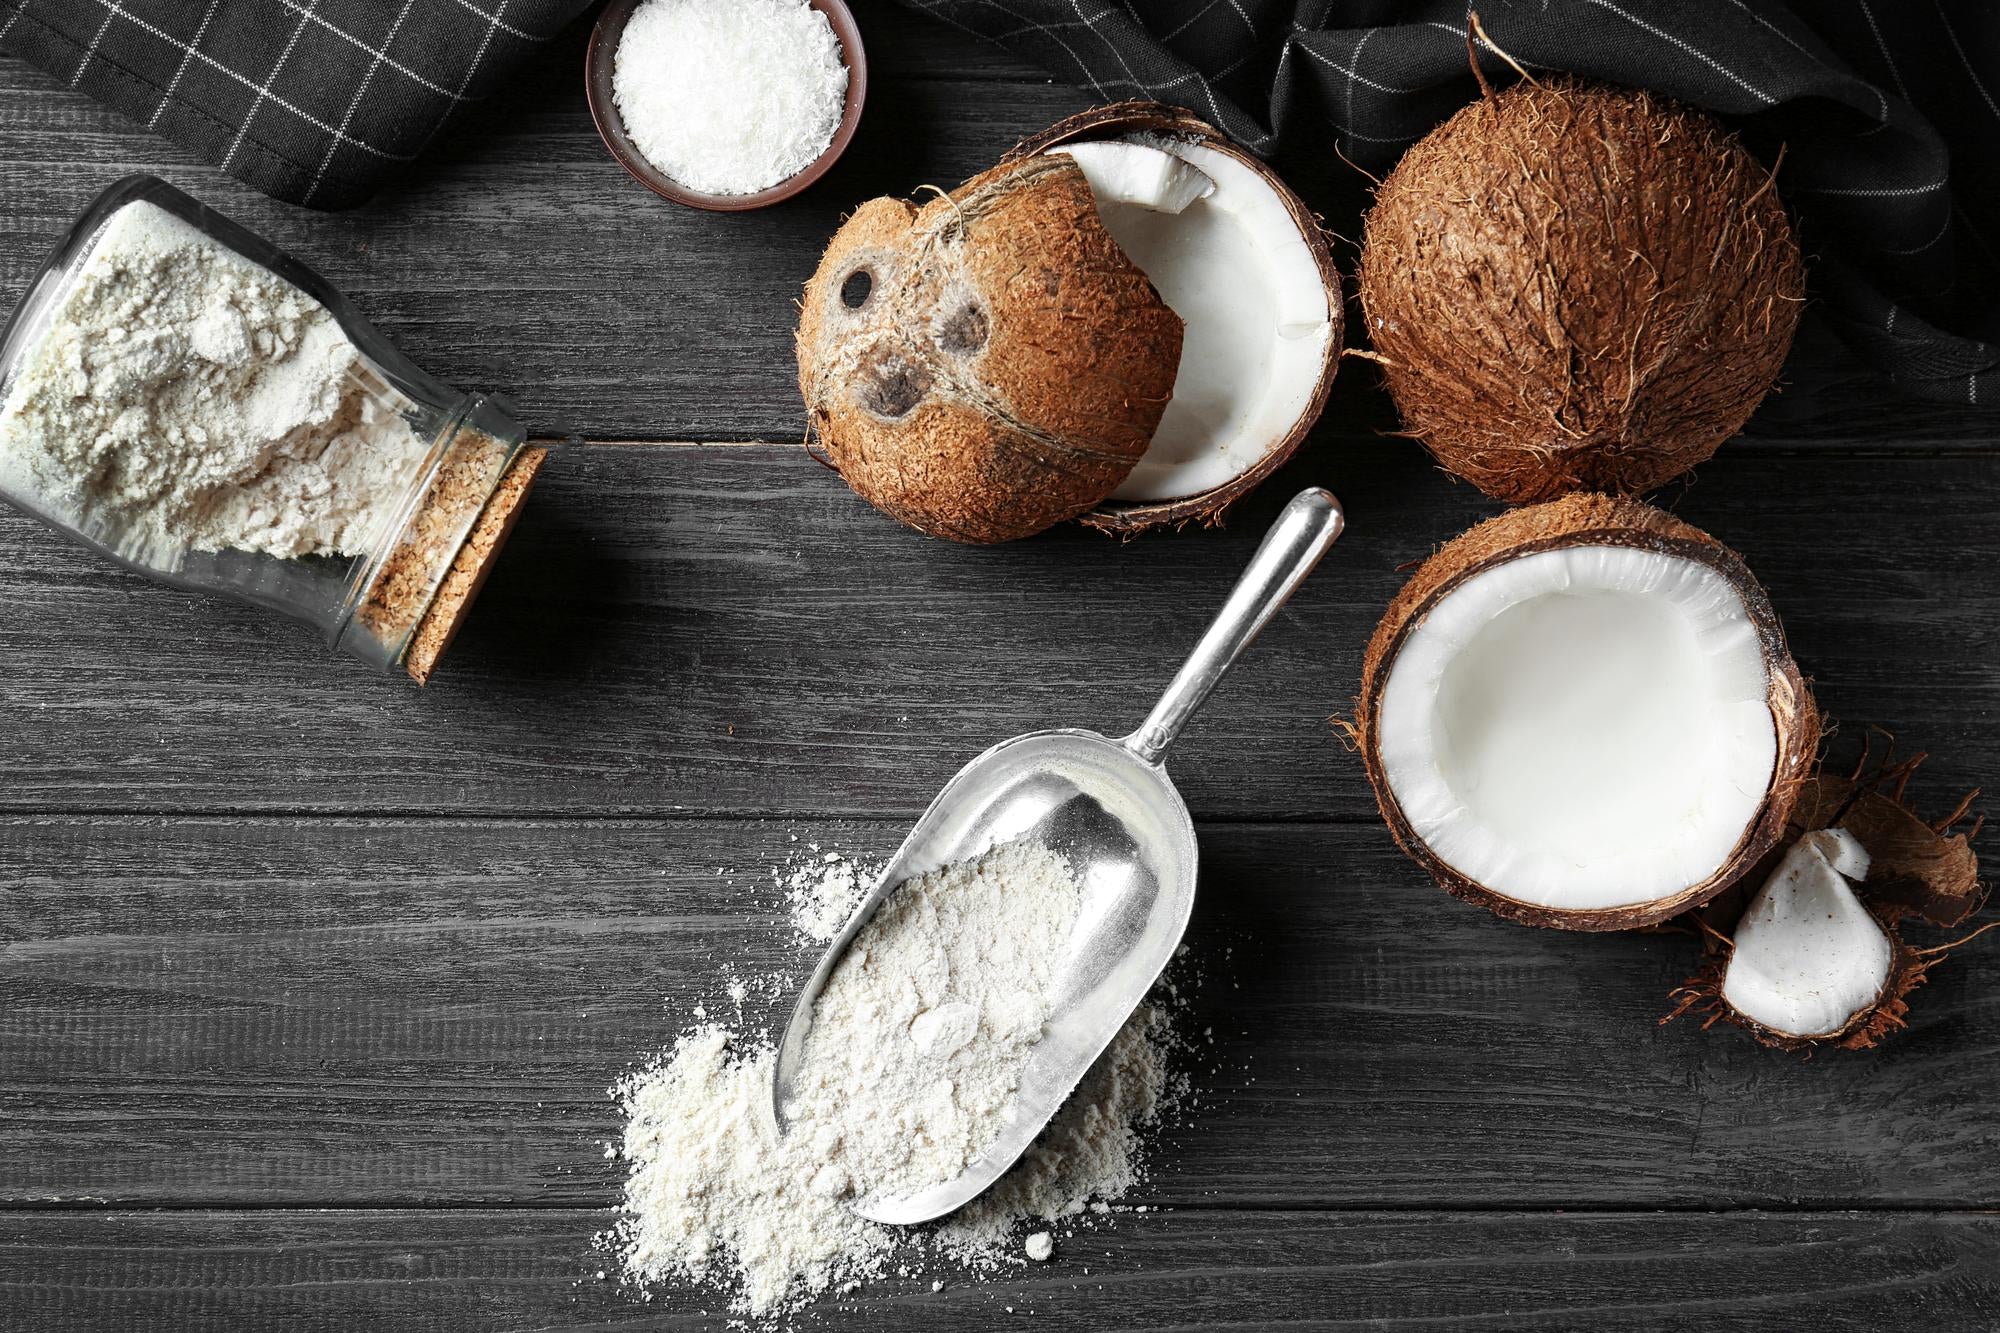 Deliciously Healthy: Baking with Coconut Flour